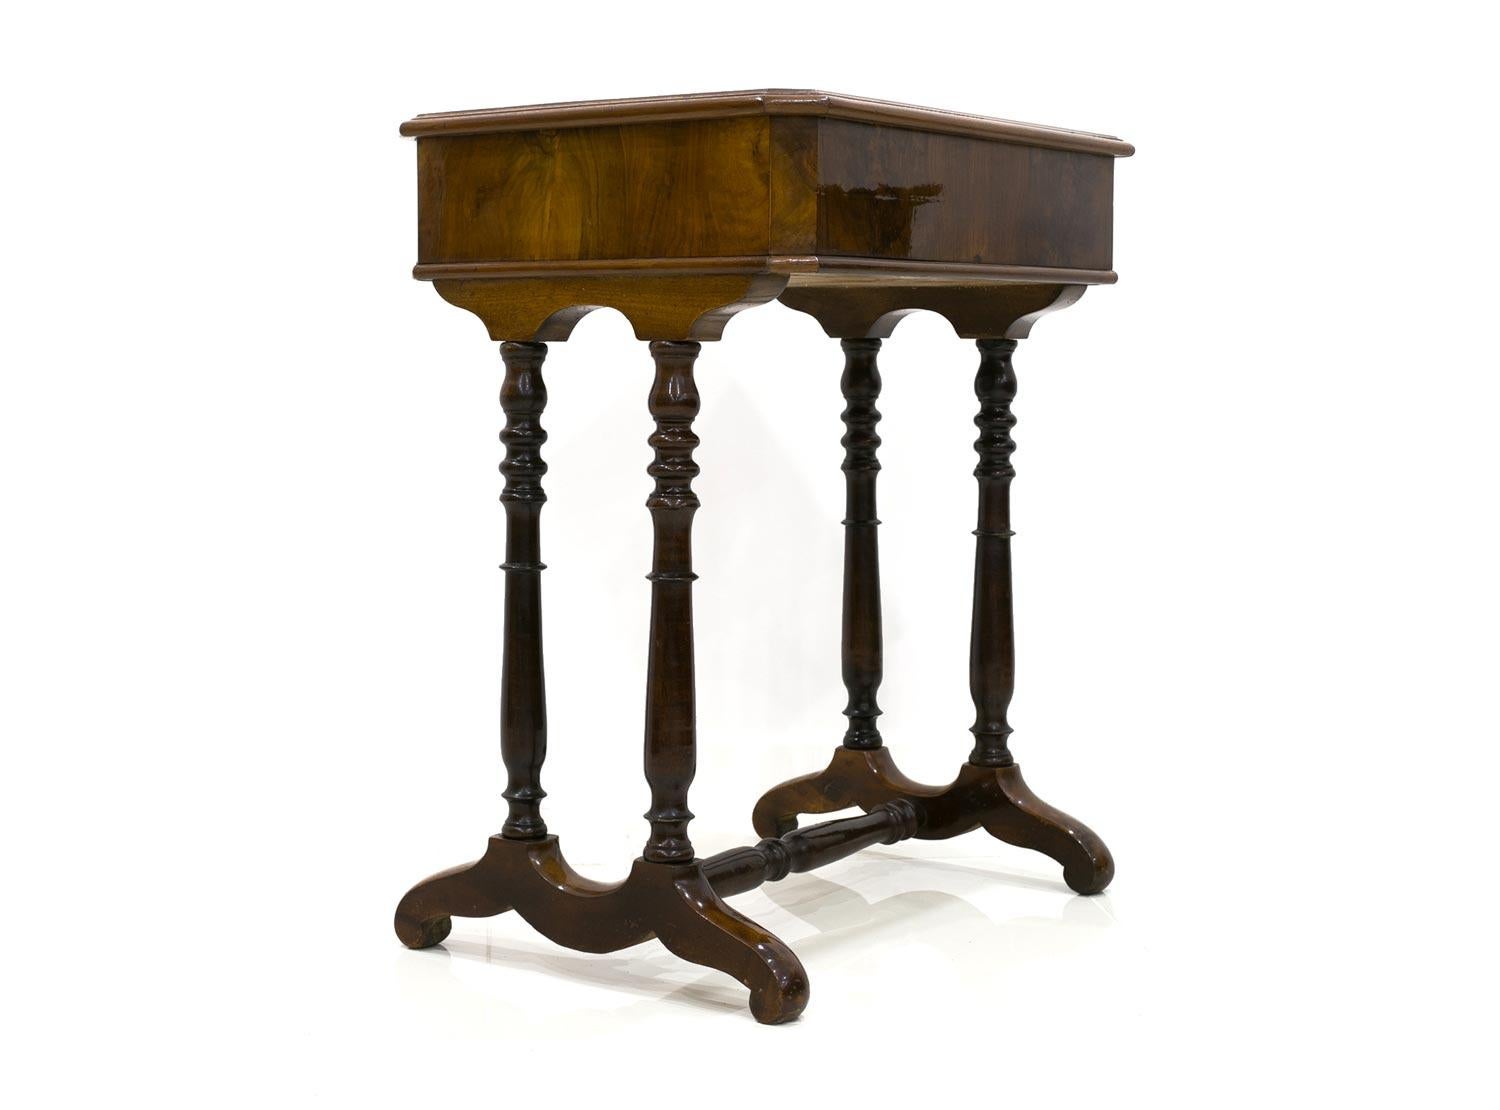 Biedermeier Decorative Thread Table with Marquetry Details, France, circa 1820 In Excellent Condition For Sale In Wrocław, Poland